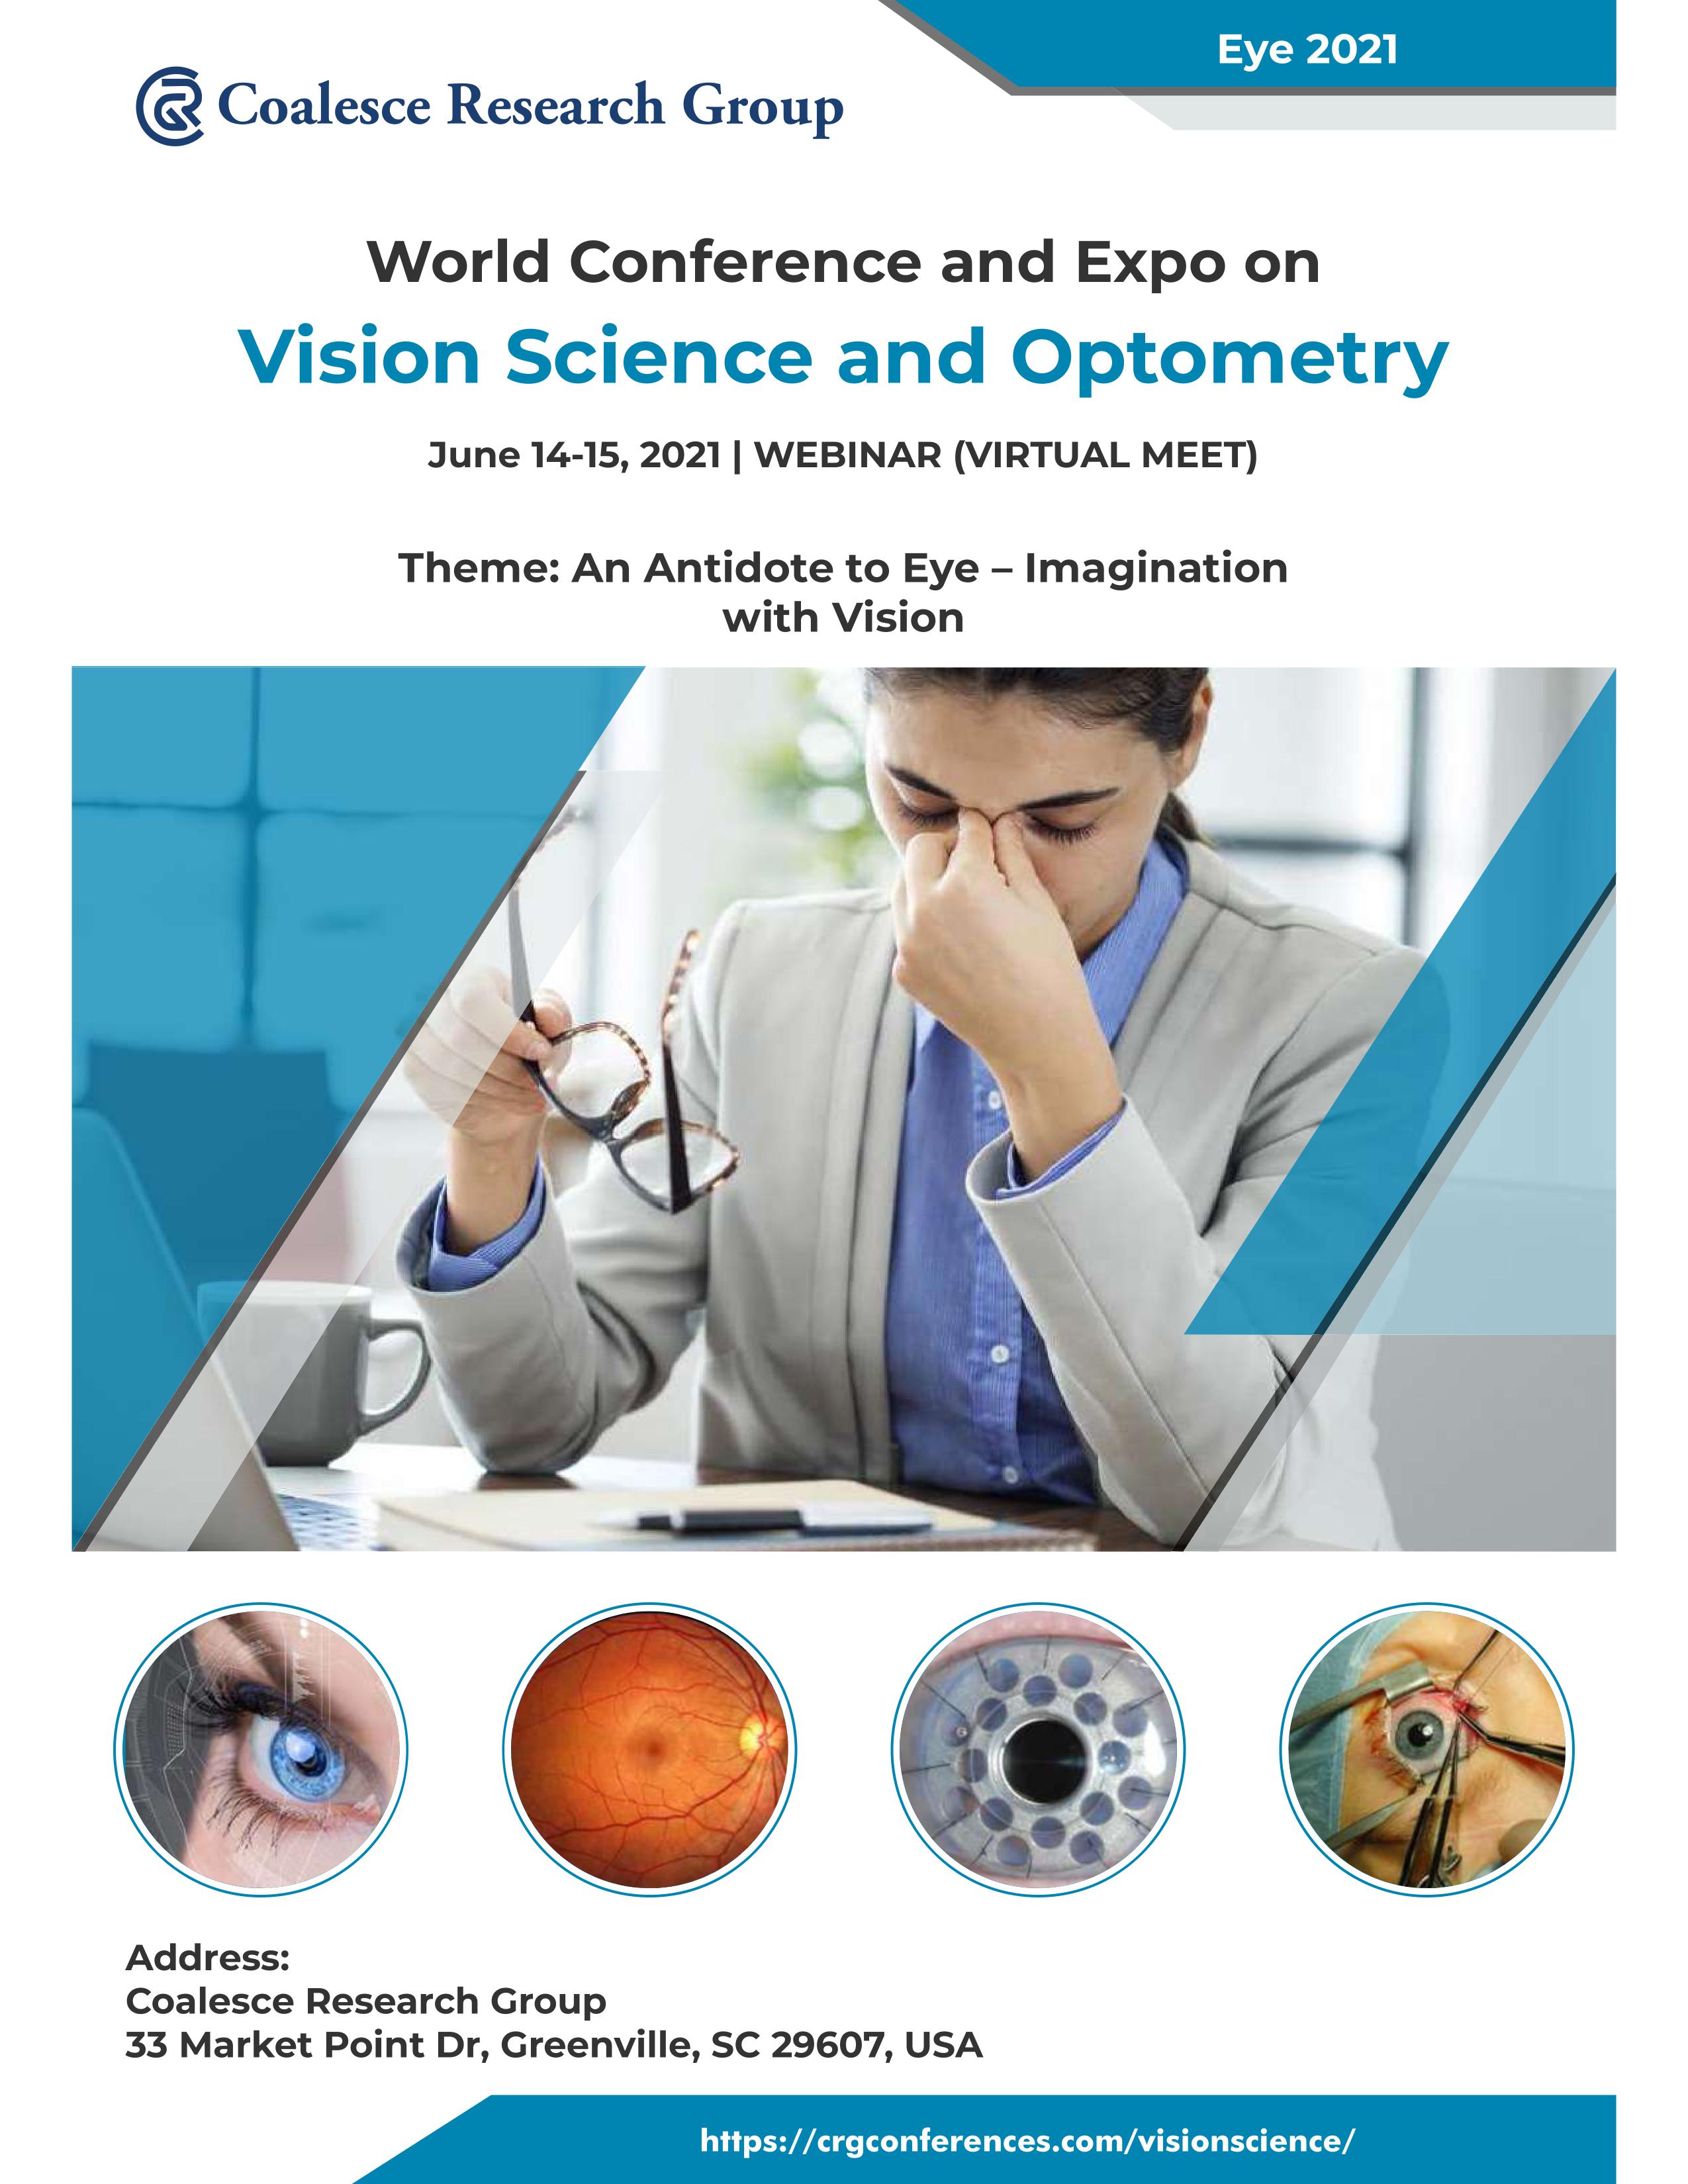 World Conference and Expo on Vision Science and Optometry